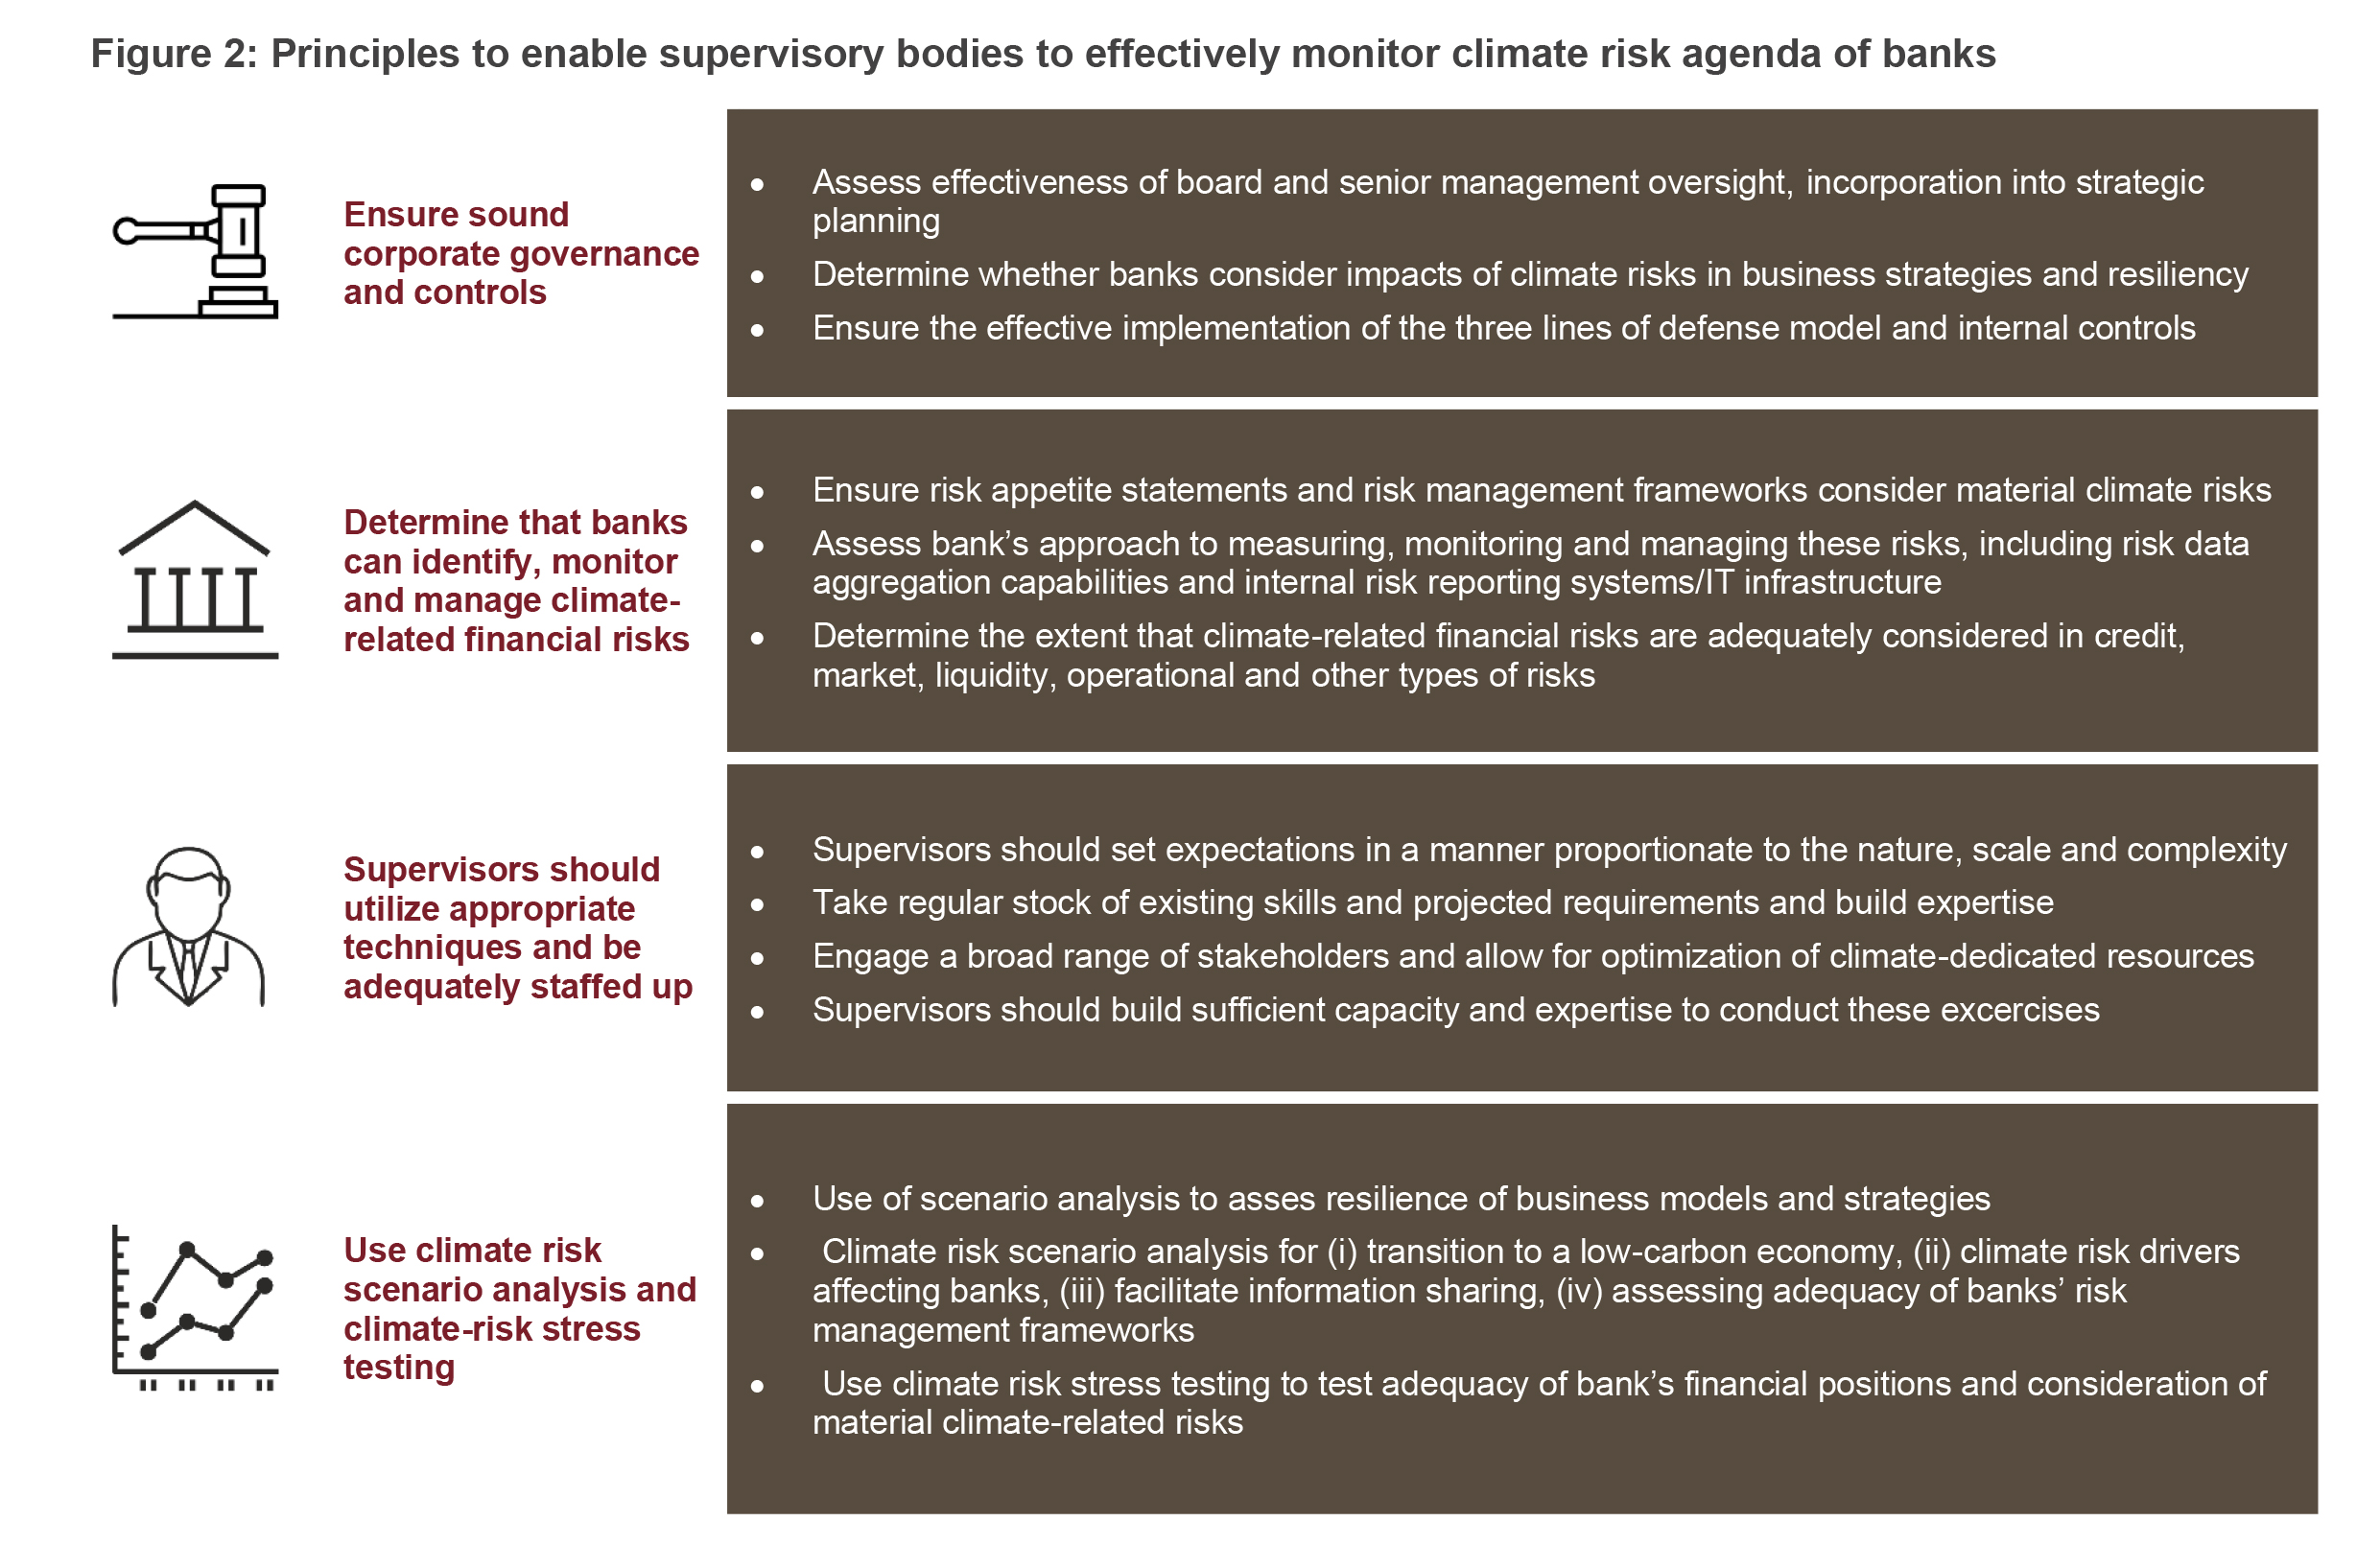 Figure 2: Principles to enable supervisory bodies to effectively monitor climate risk agenda of banks